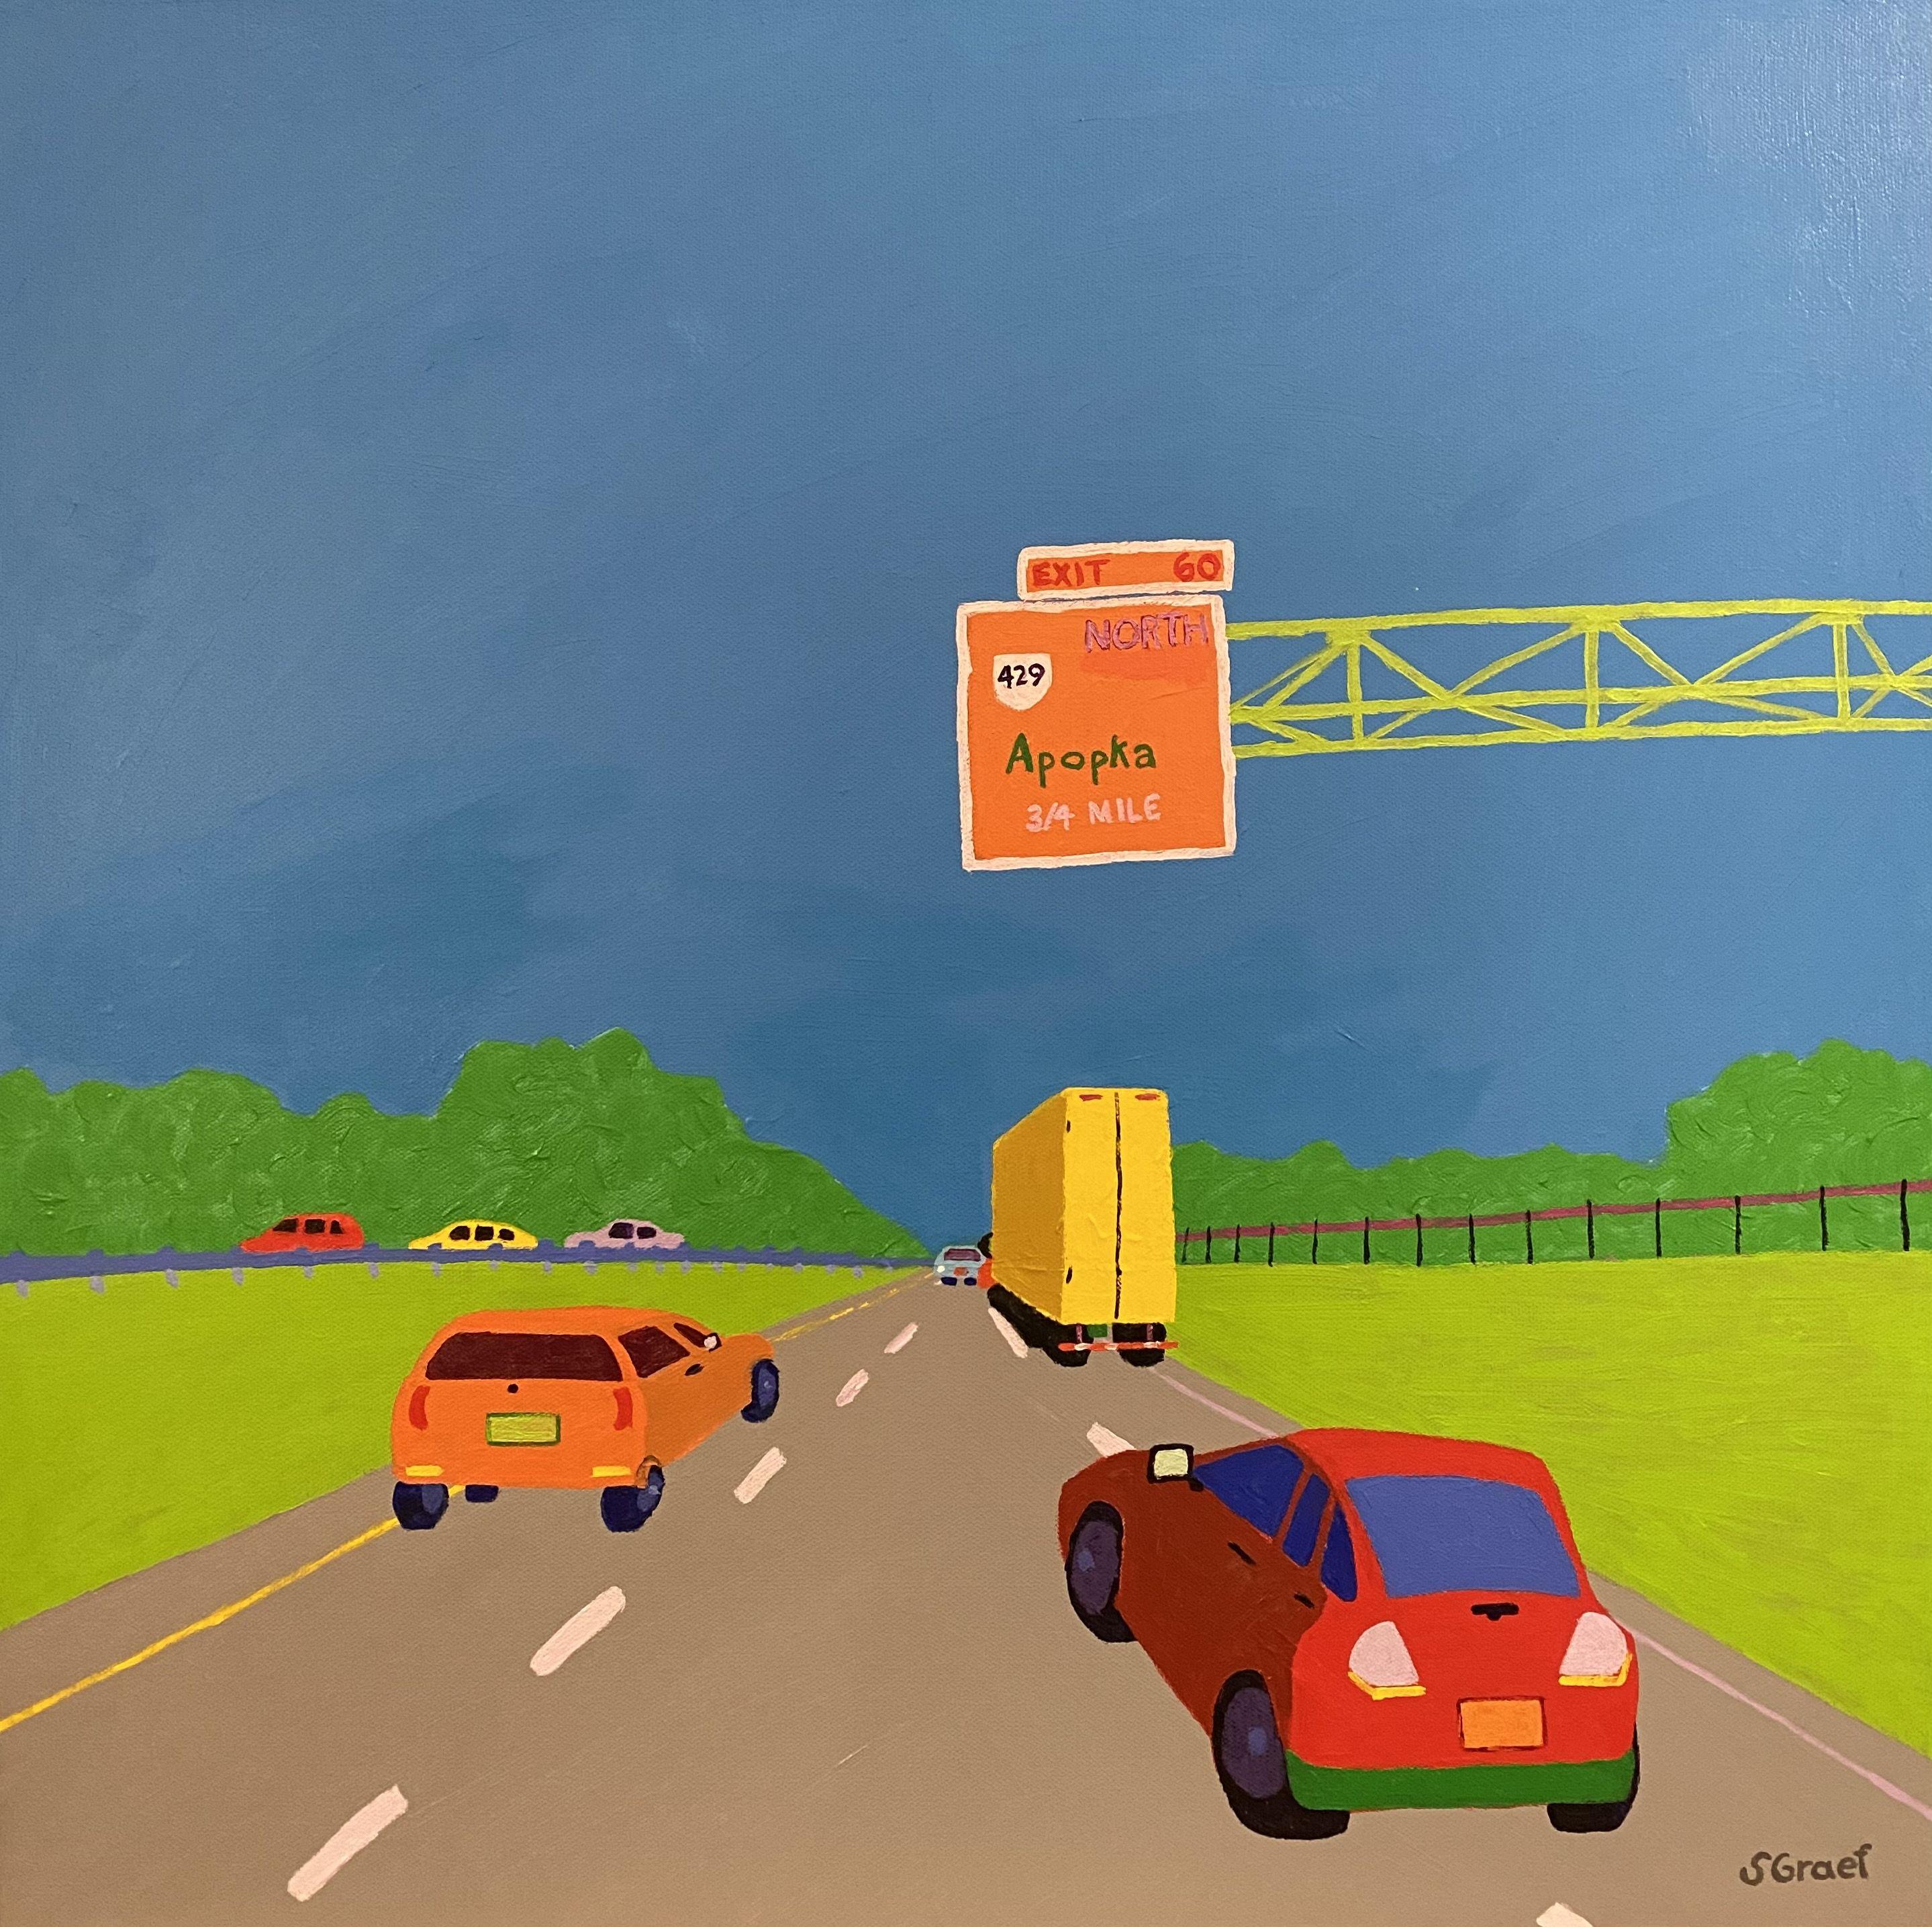 "On the Way to Orlando" was conceived on a drive with my husband from our home to Orlando, Florida. it's predominantly a very boring drive but I saw this weird sign for a strange town called Apopka and I immediately wanted to paint it. The only